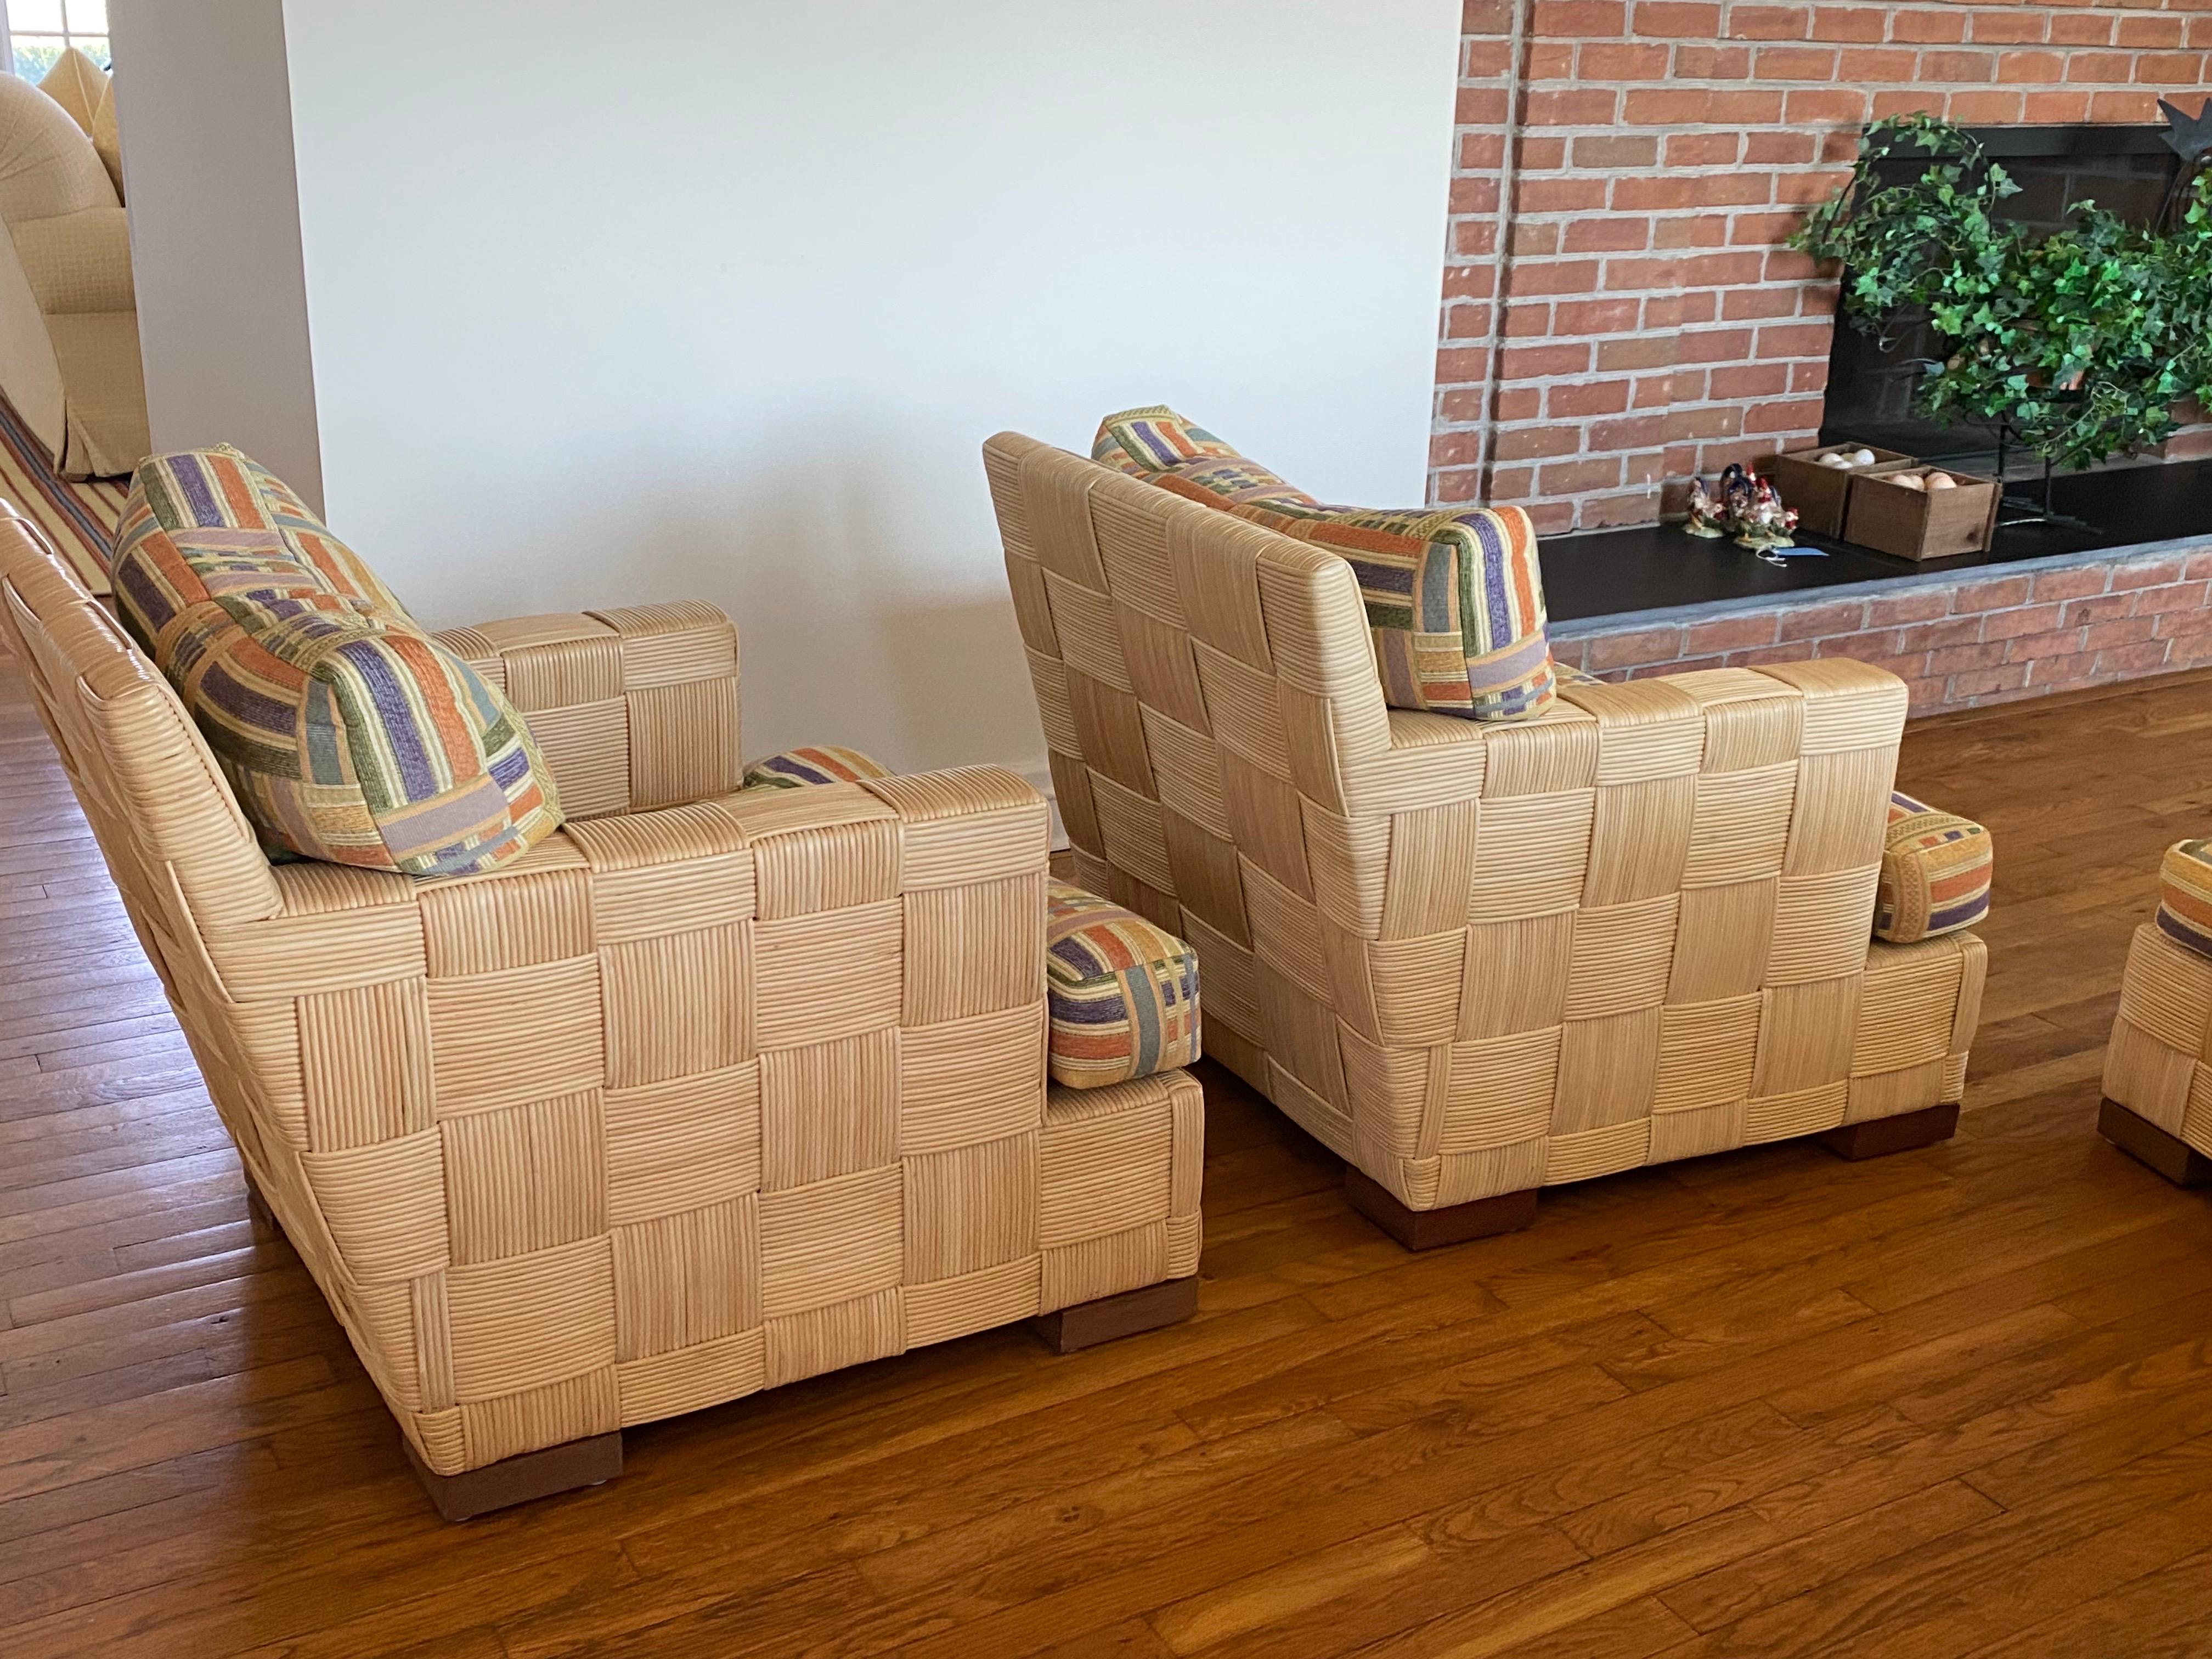 Fabric Pair Block Island Cane Club Chairs & Ottoman by John Hutton for Donghia, 1990s For Sale